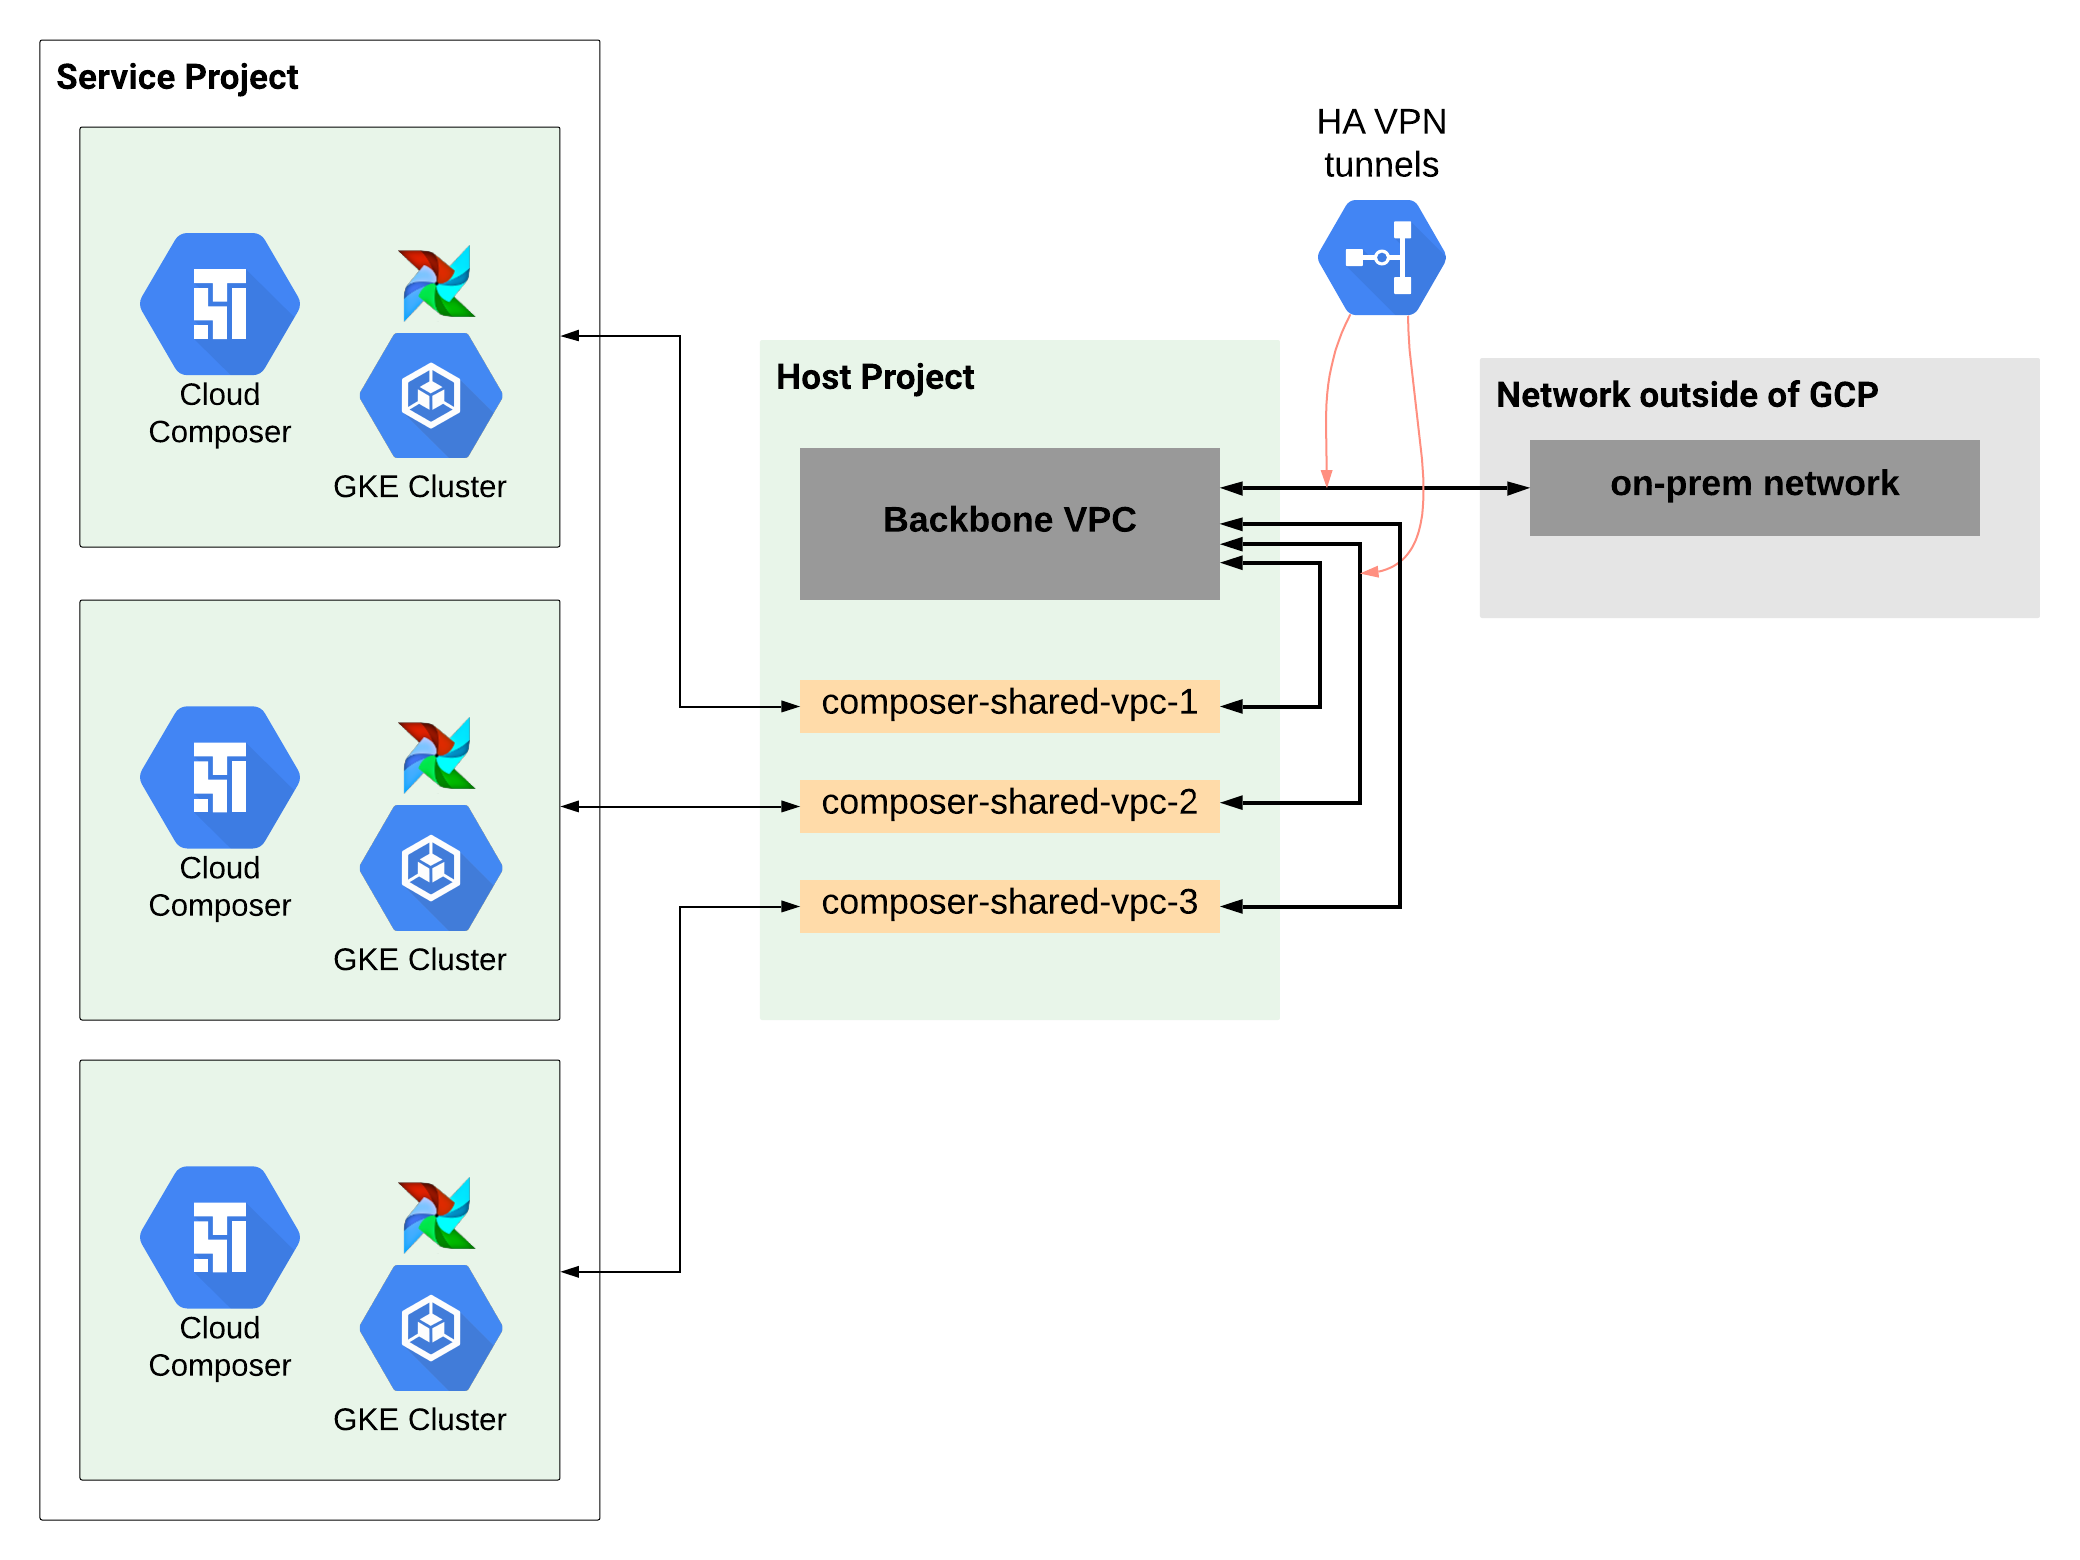 Large-scale network setup in a Shared VPC scenario